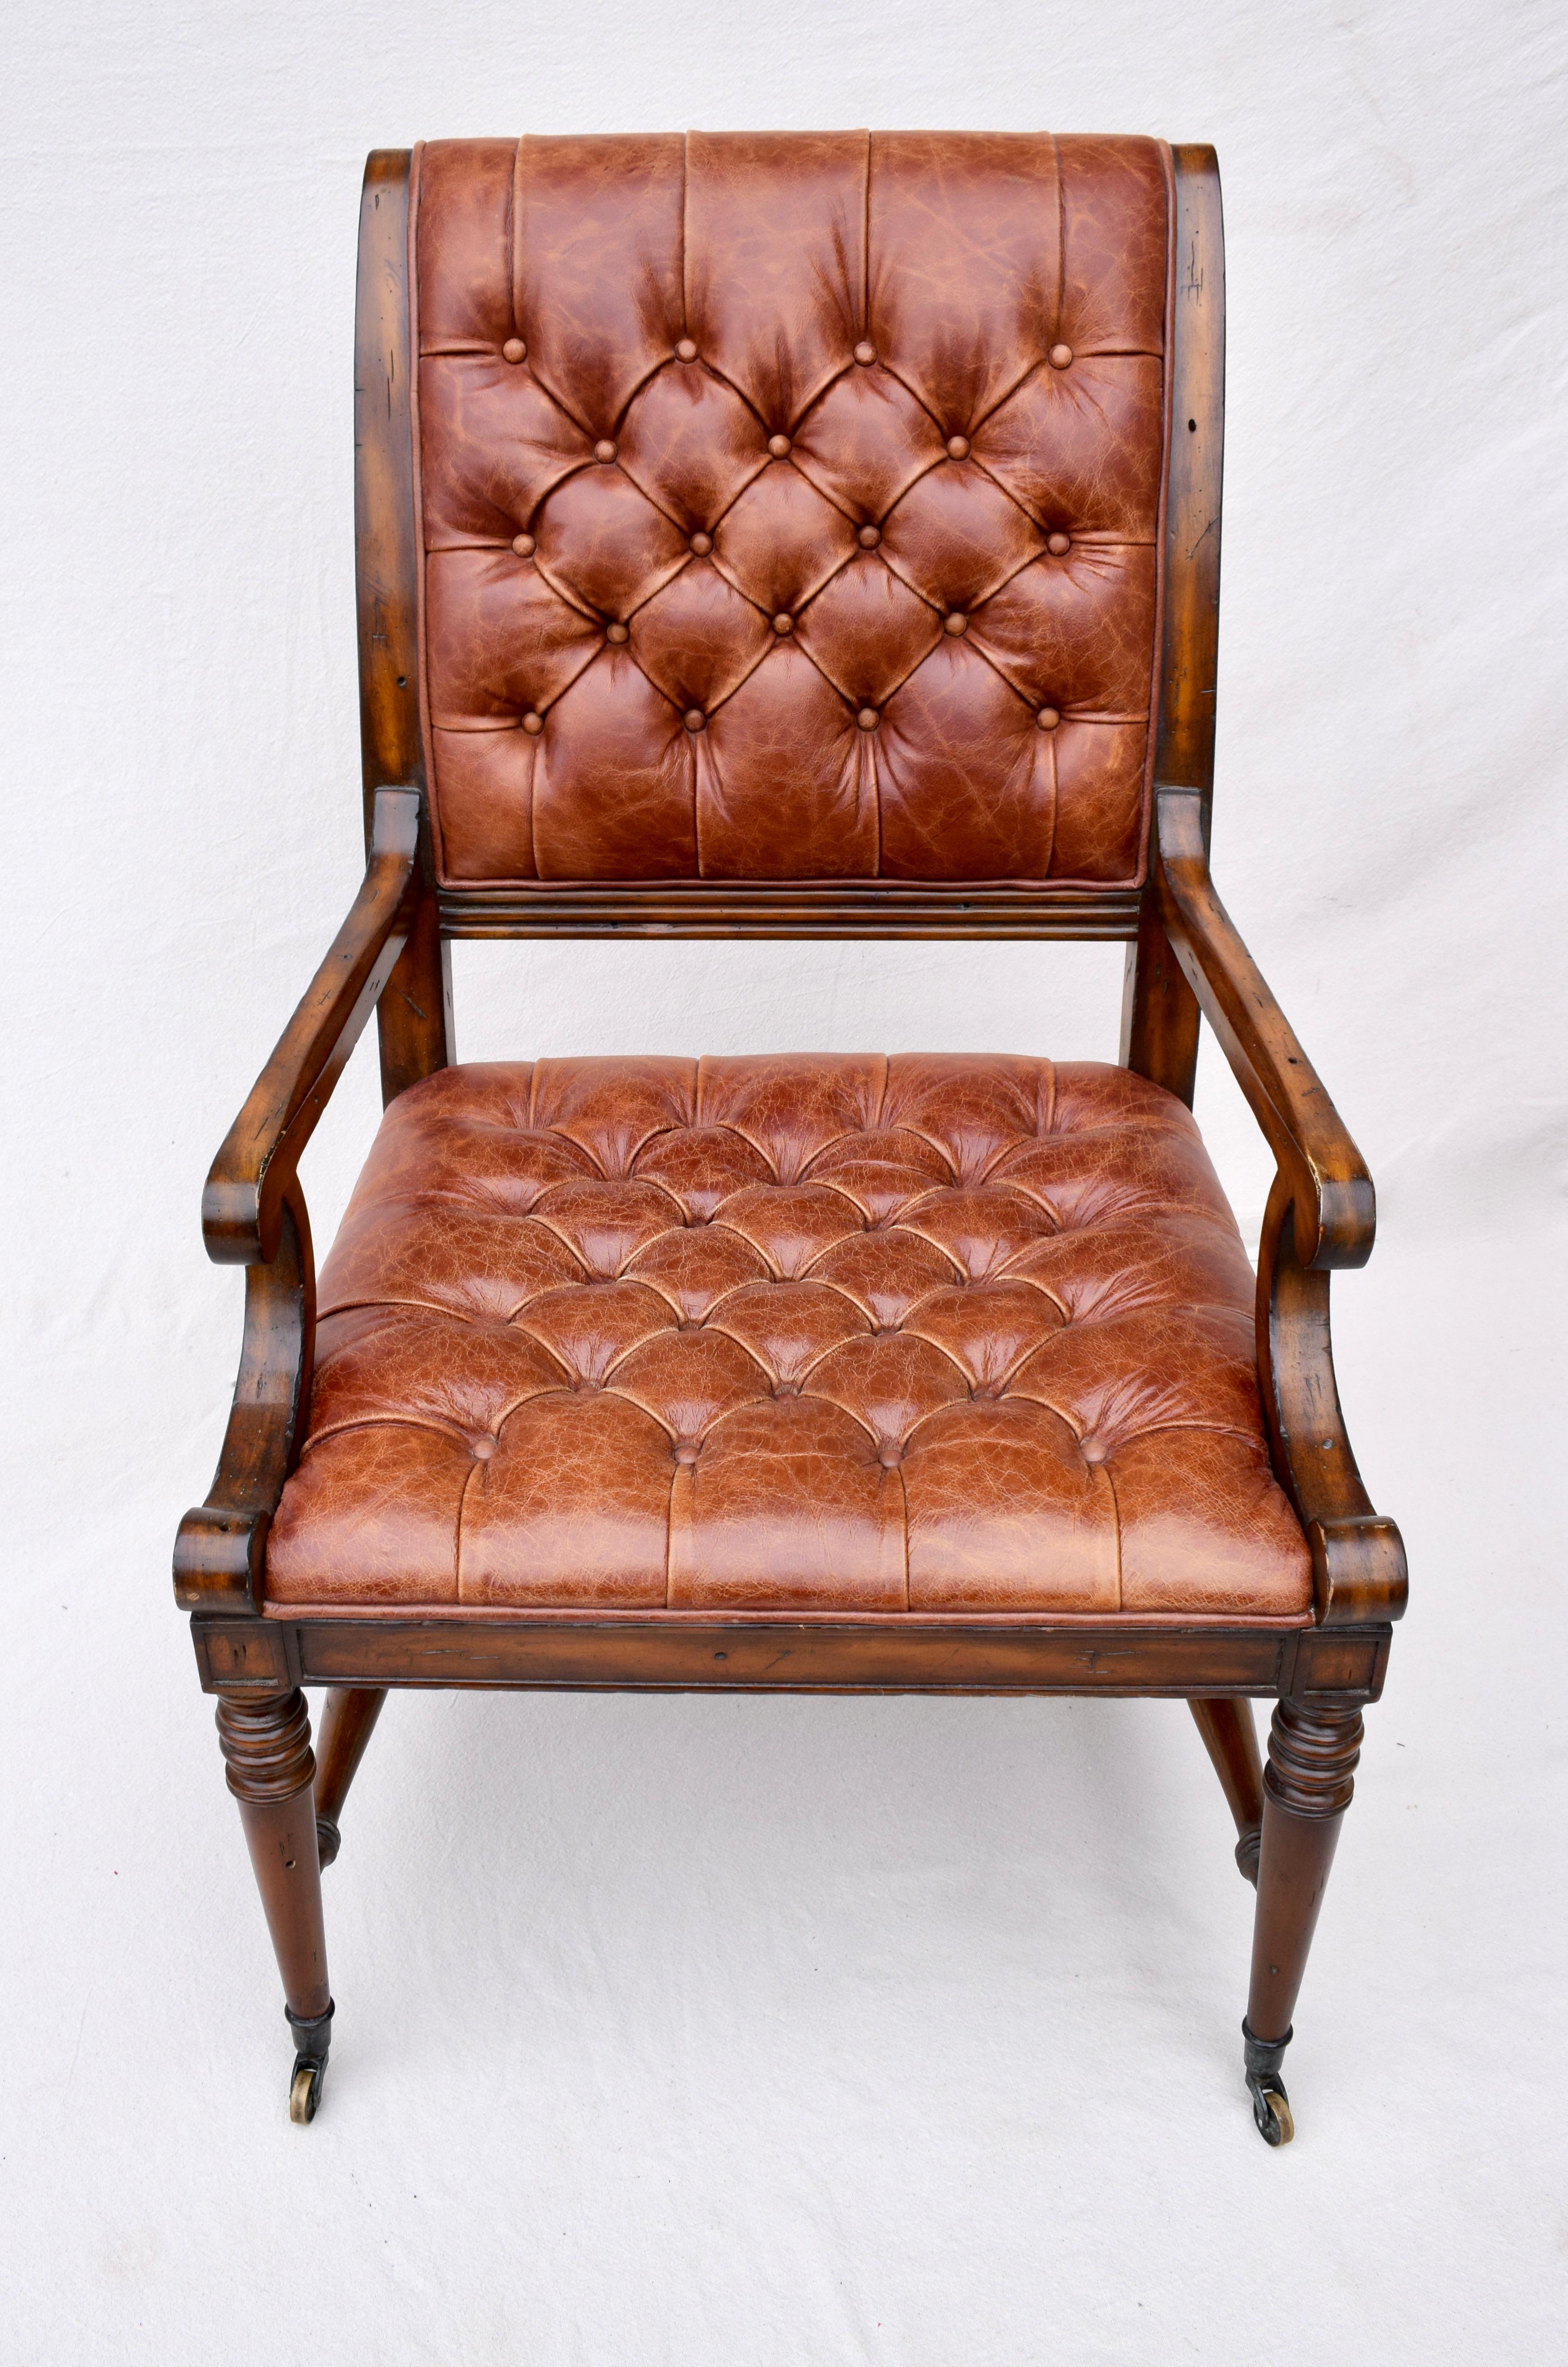 An impressive English Regency style open arm tufted leather library chair on brass casters in rarely if ever used condition. Maker unknown, in the styles of Beacon Hill & Baker Furniture Company.